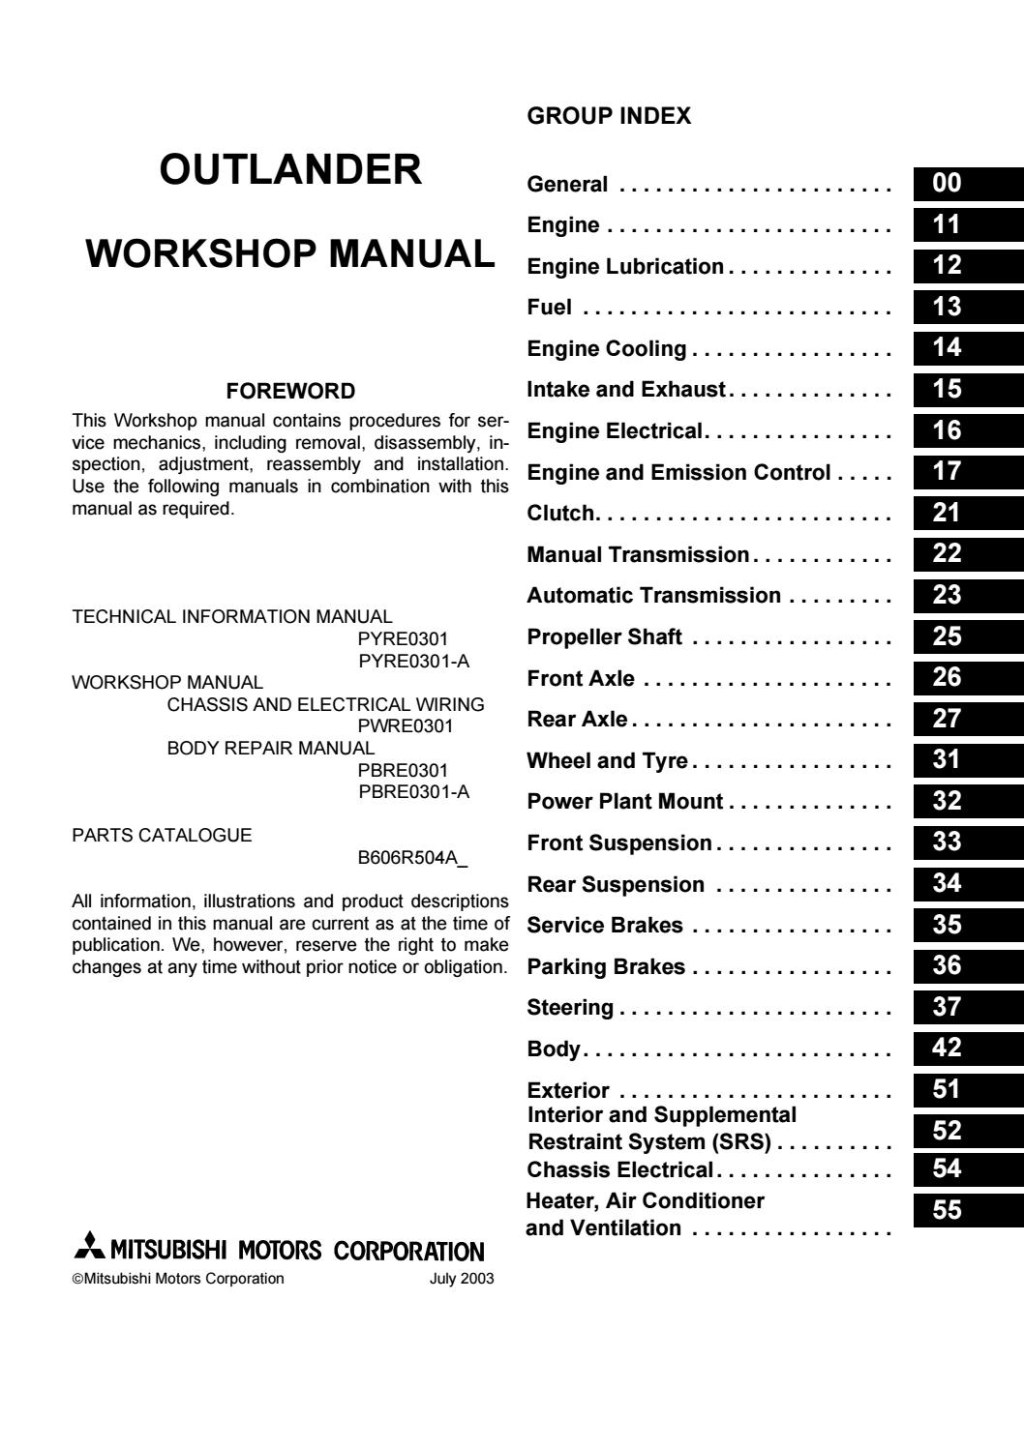 Picture of: Mitsubishi Outlander Service Repair Manual by  – Issuu